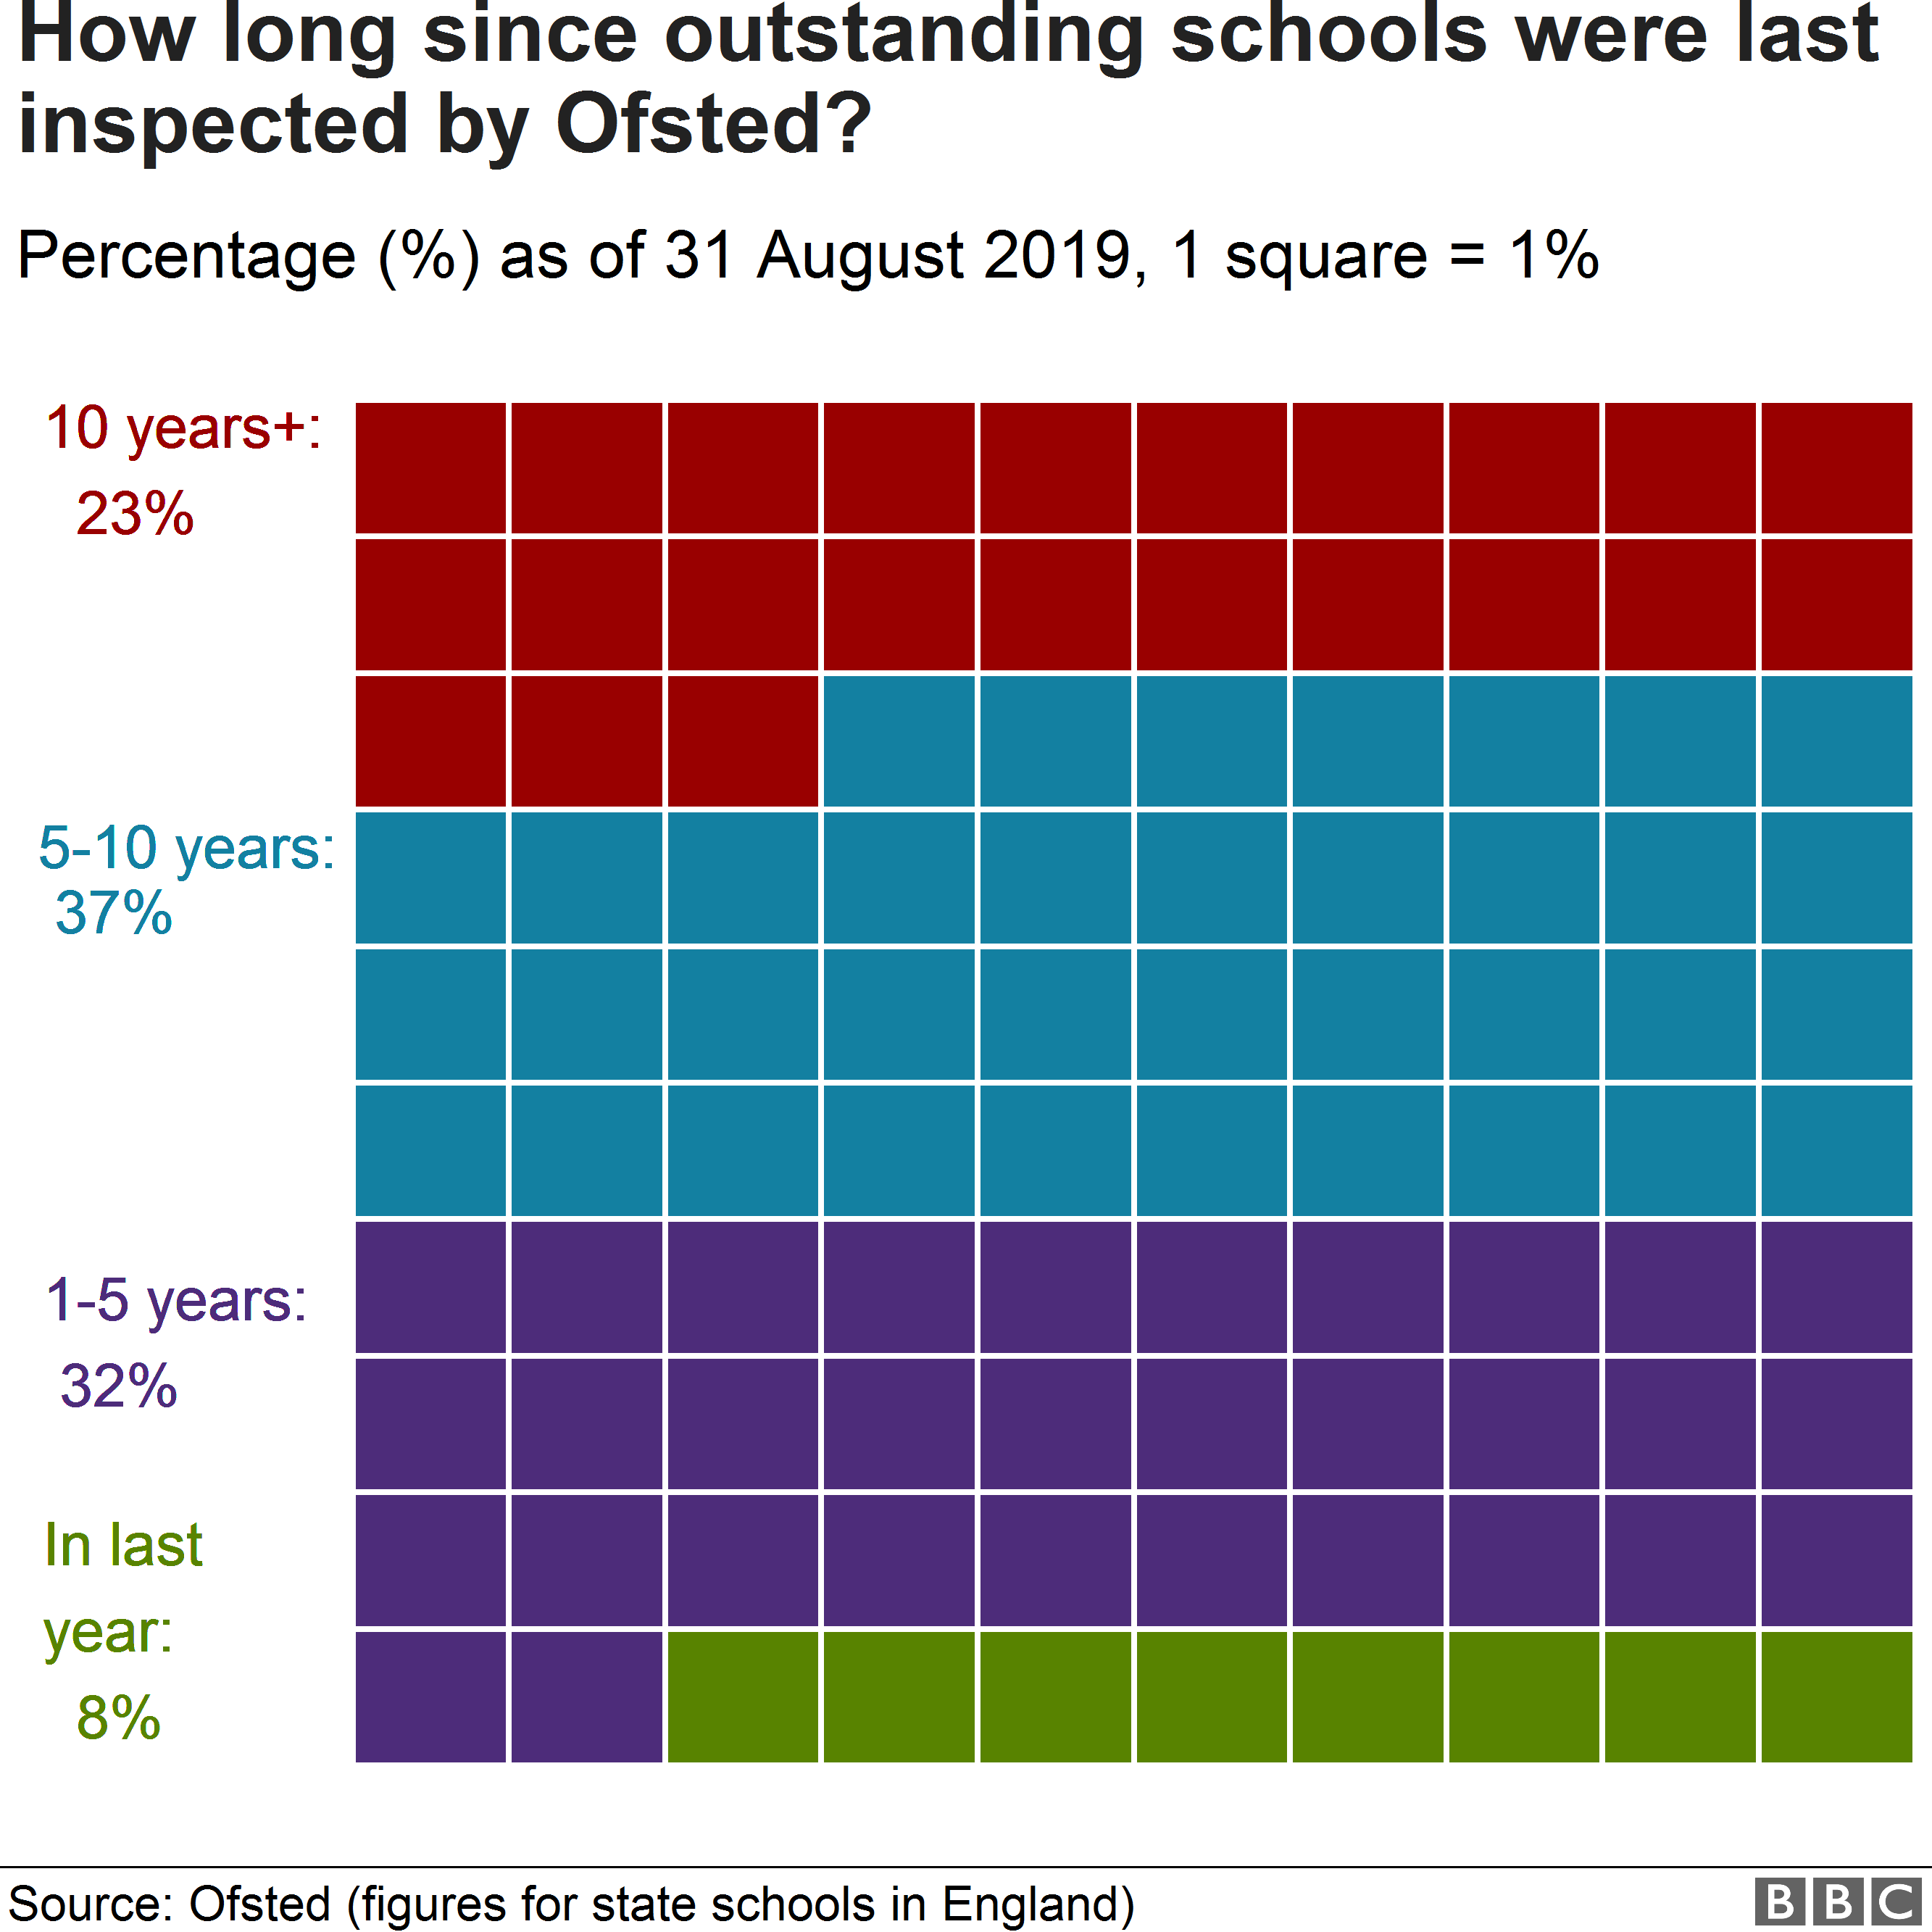 Chart showing how long since outstanding schools were last inspected by Ofsted